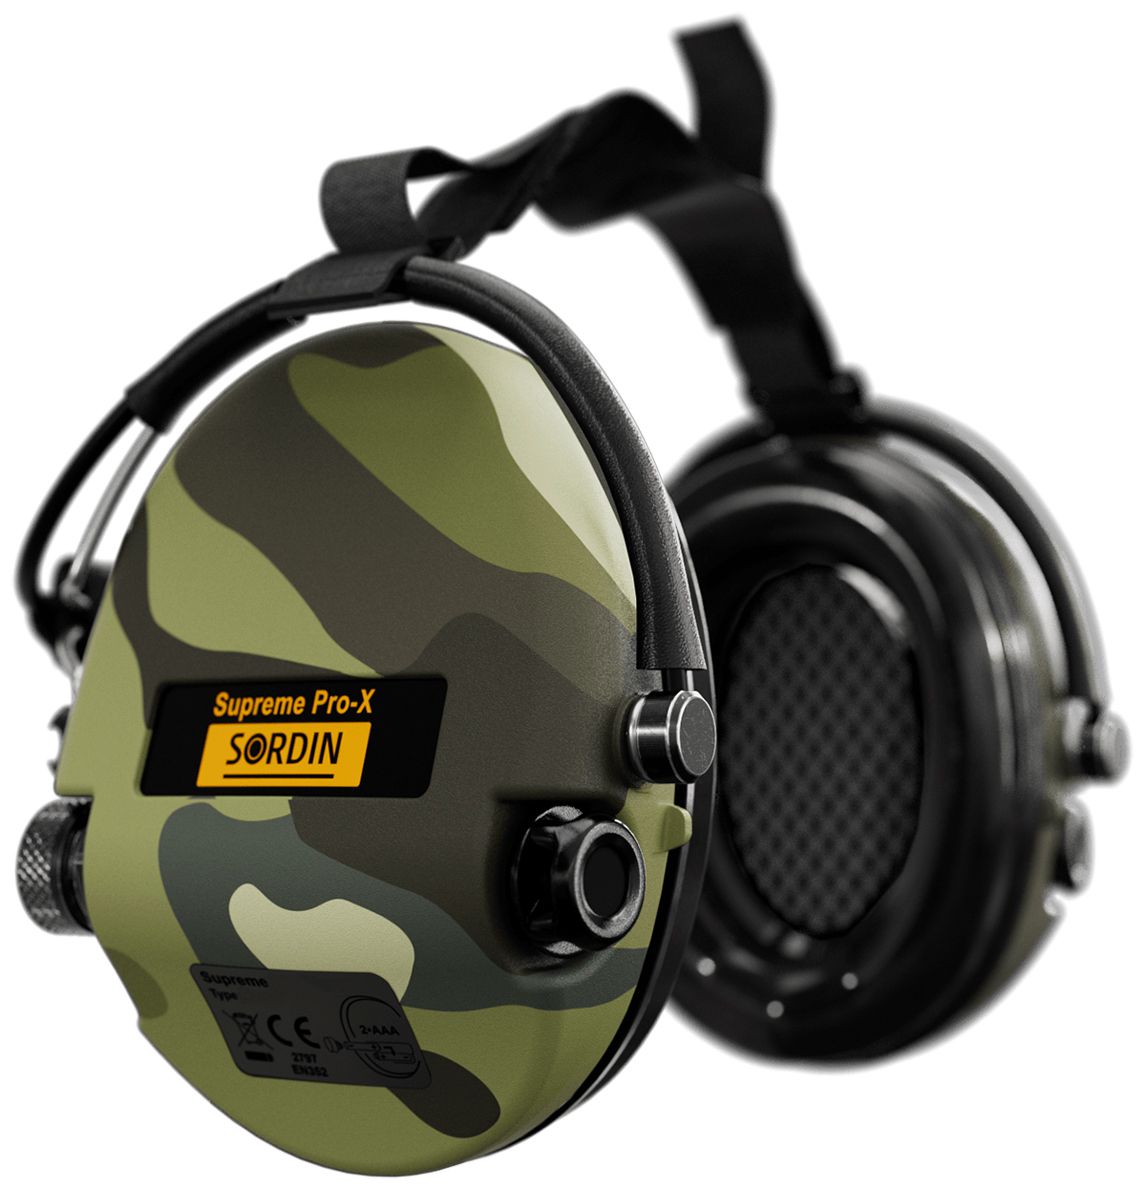 Sordin Supreme Pro-X Hearing Protection - Active Hunting Hearing Protector - EN 352 - Gel Cushion, Neck Strap & Camo Capsule